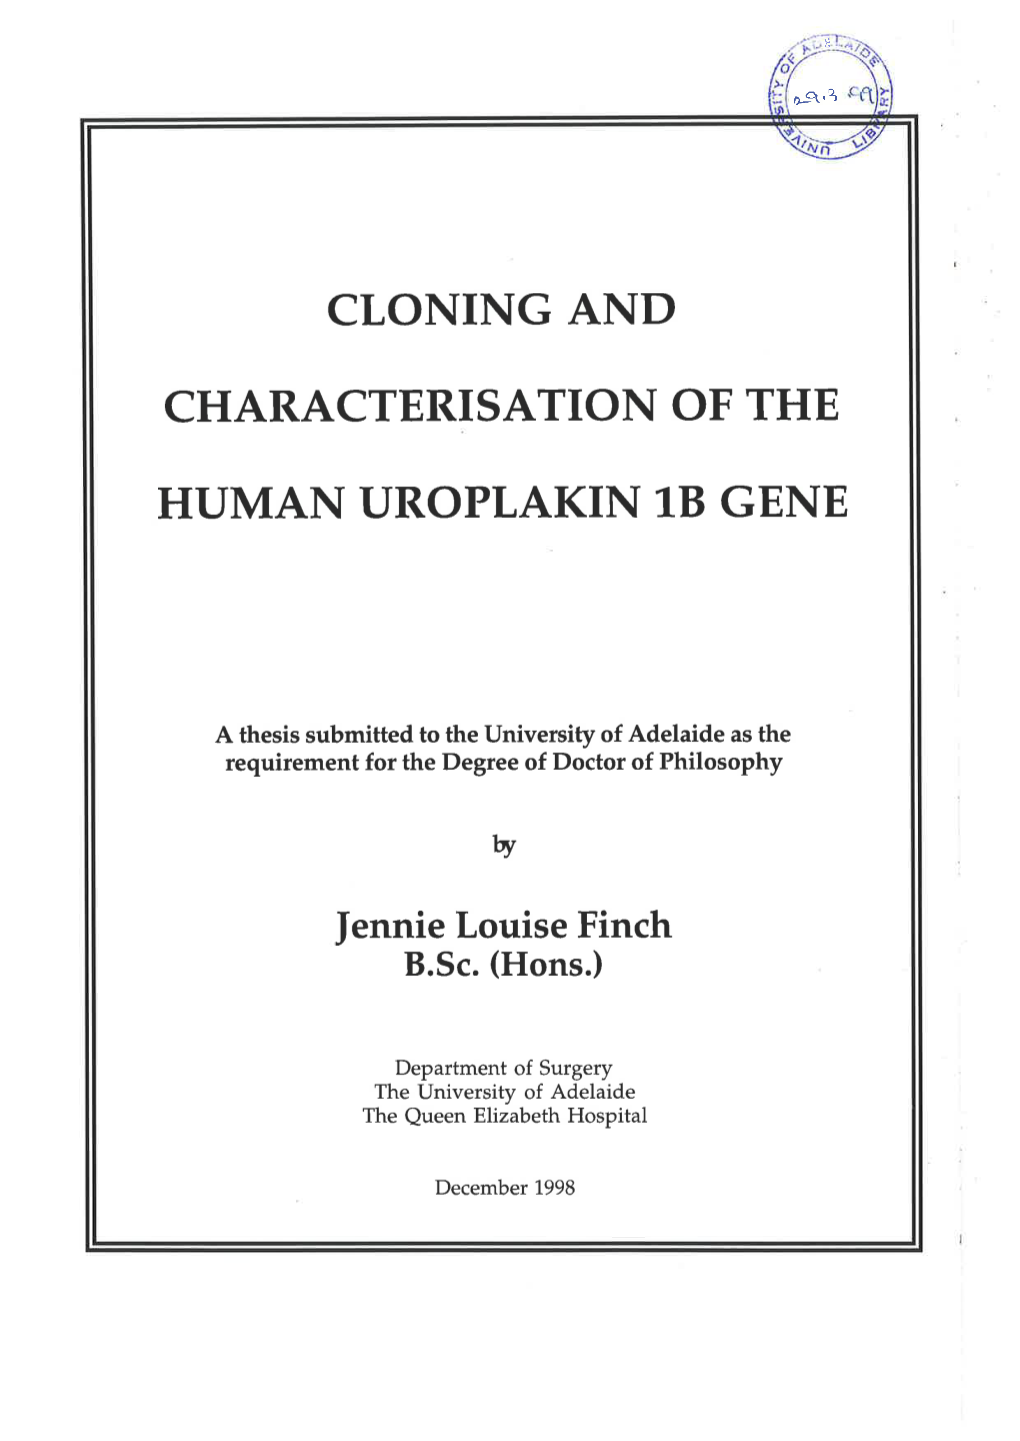 Cloning and Characterisation of the Human Uroplakin 1B Gene L79 8.L.3 UPKLB and Bladder Cancer 182